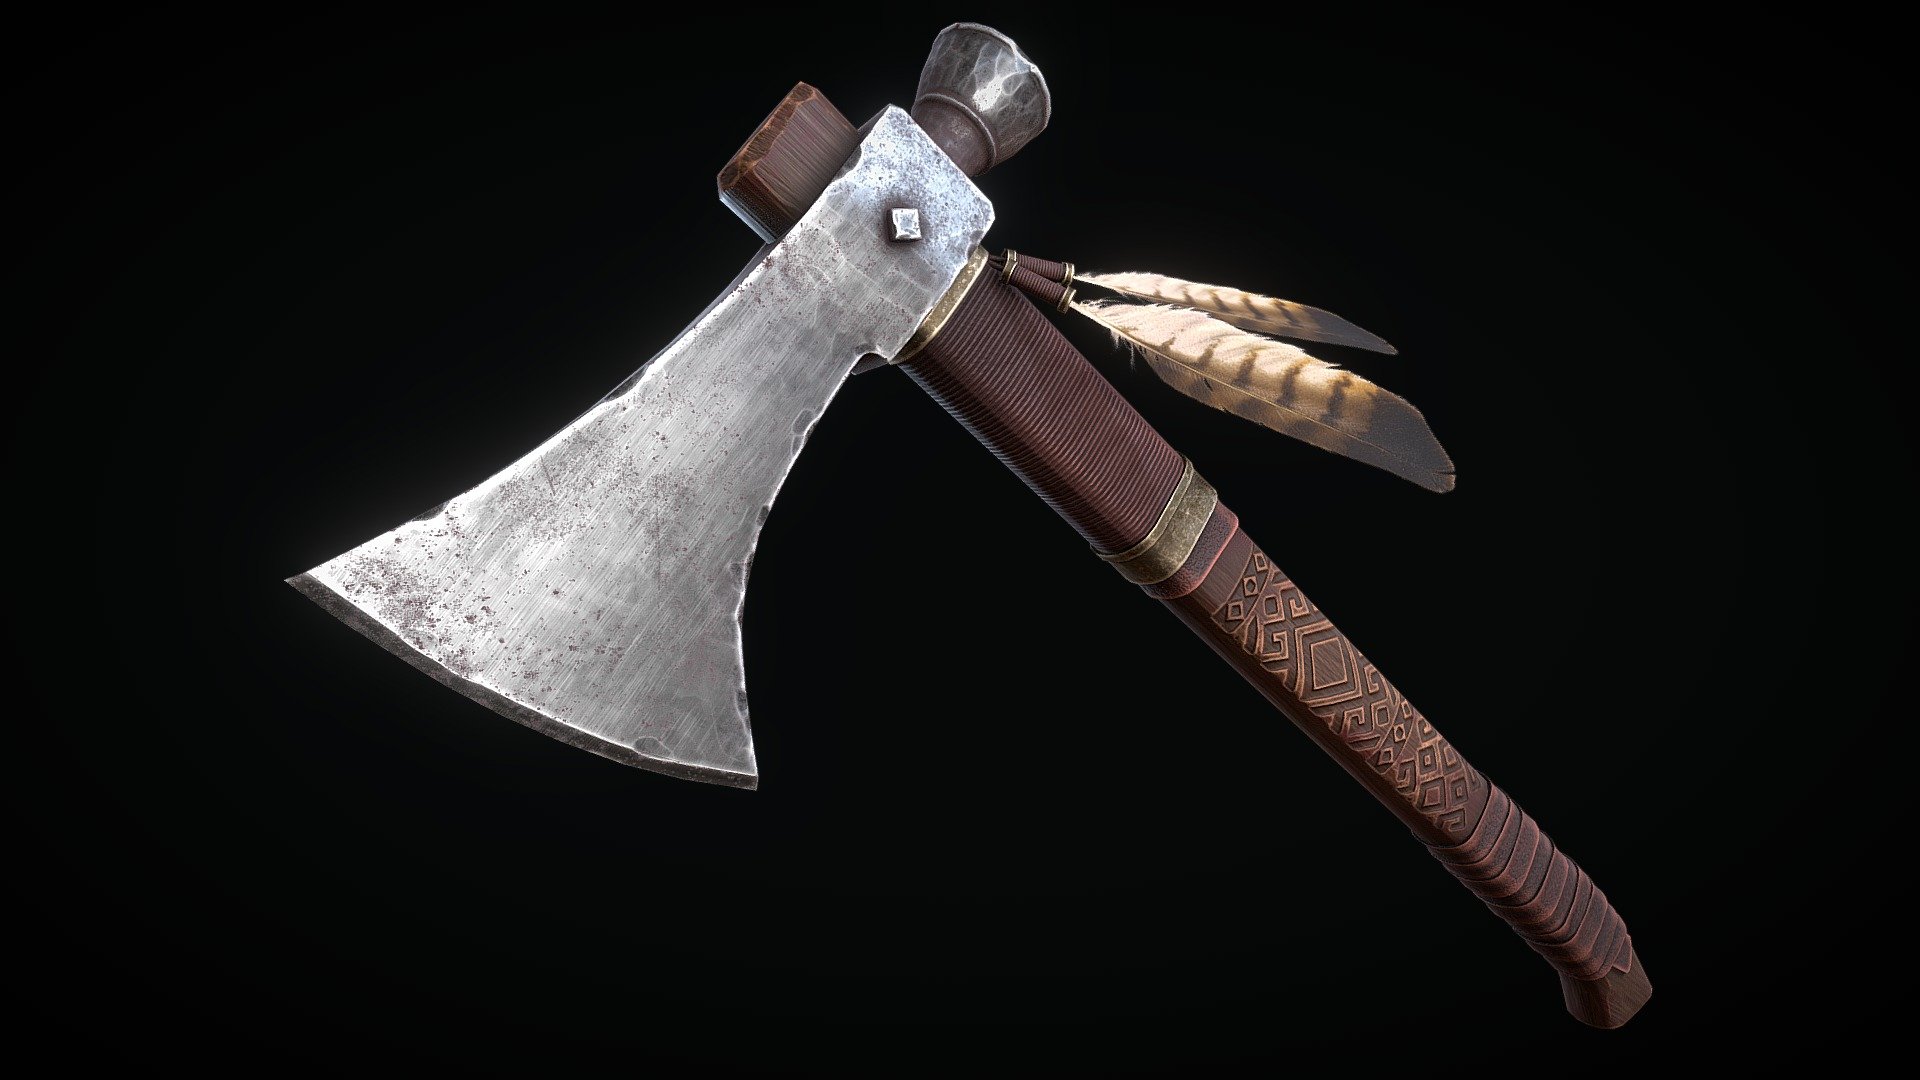 Low-poly 3D model of the Decorated Tomahawk Axe doesn't contain any n-gons and has optimal topology. Model has 2K textures 3d model